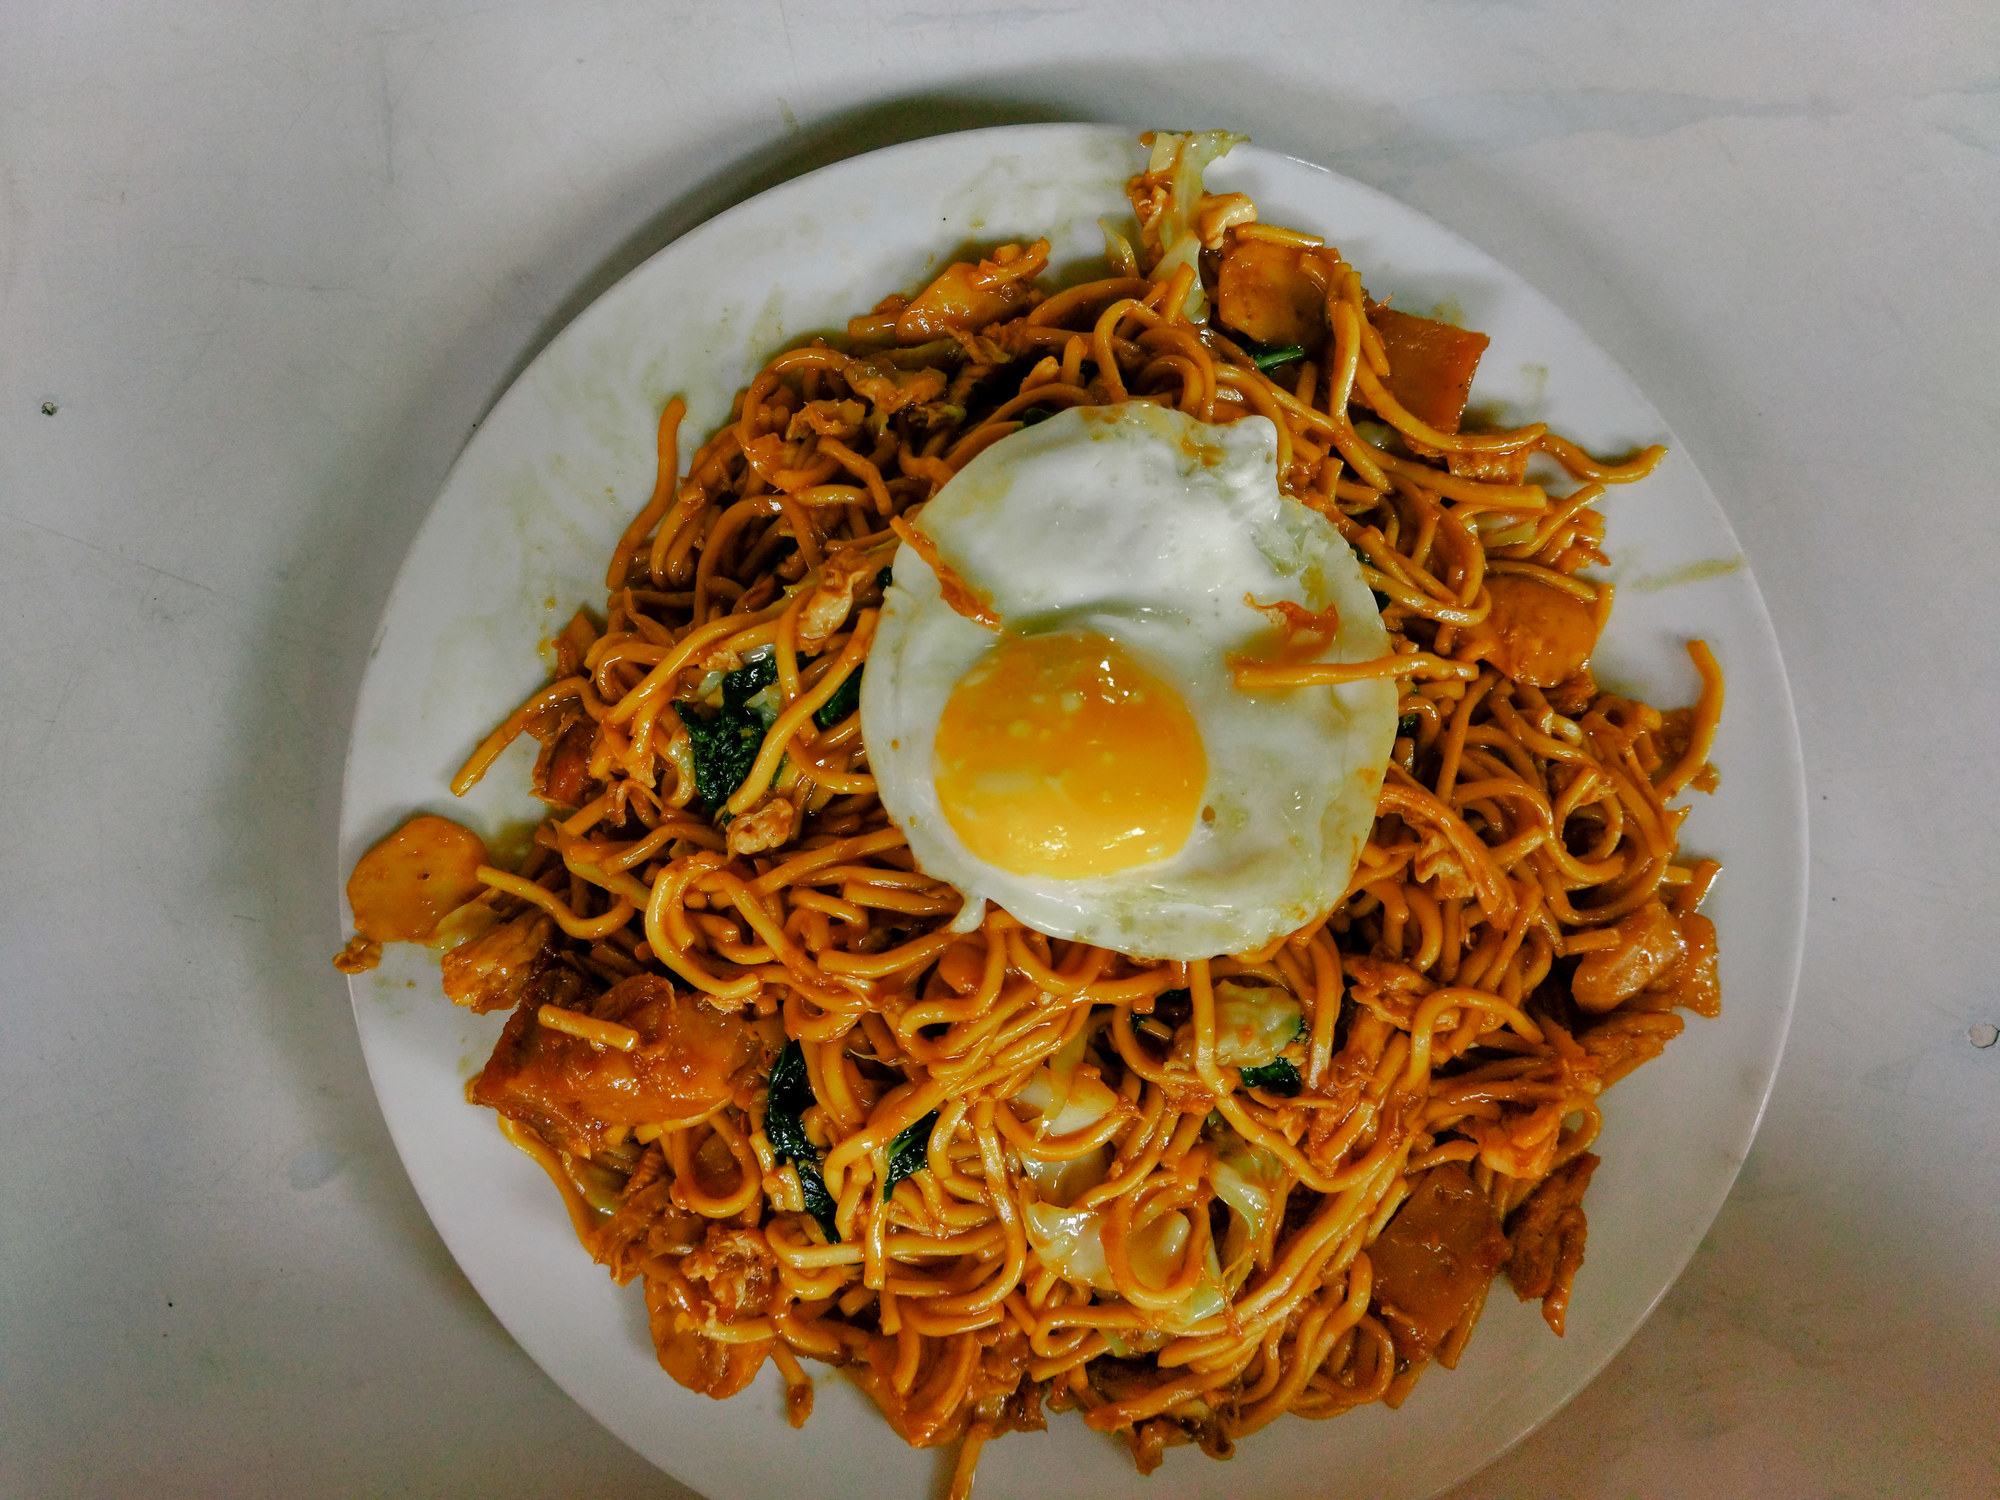 Fried noodles with fried egg on top.